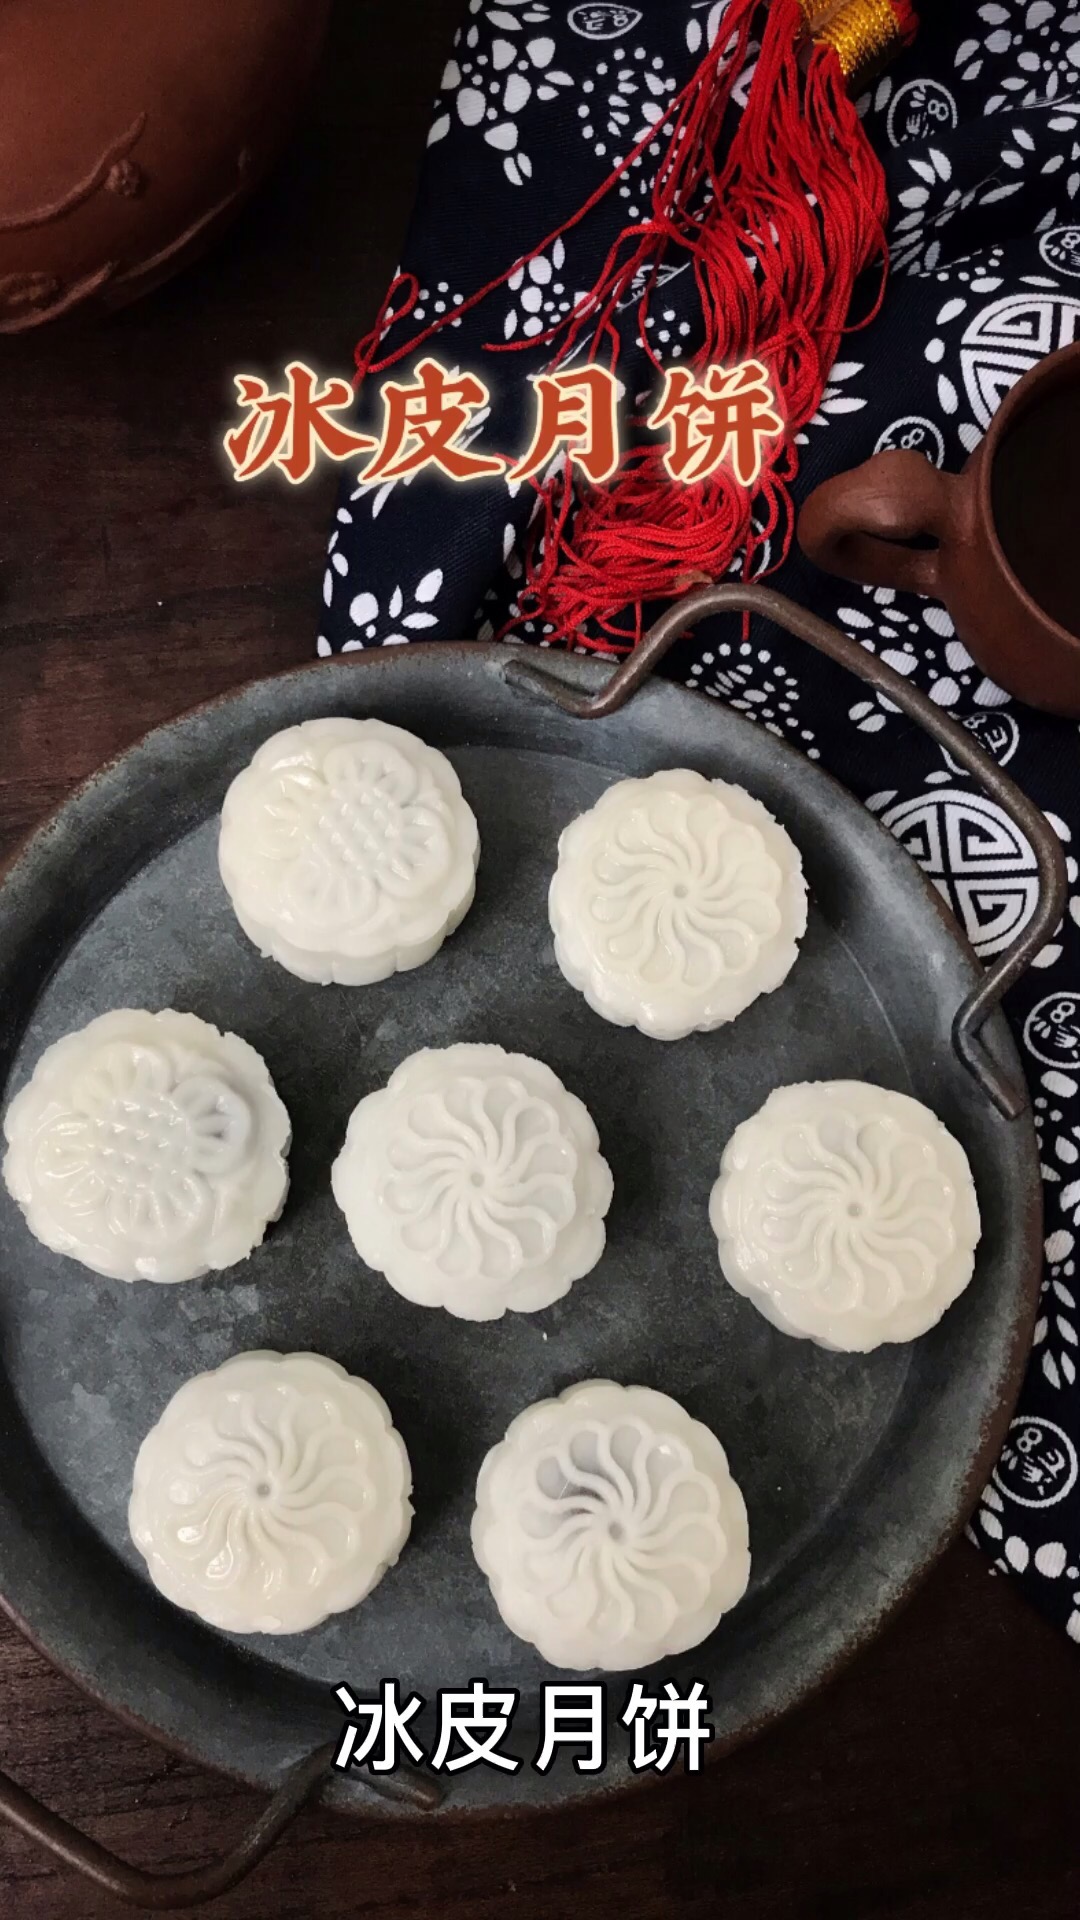 Snowy Moon Cake# The Most Beautiful But The Mid-autumn Flavour# recipe